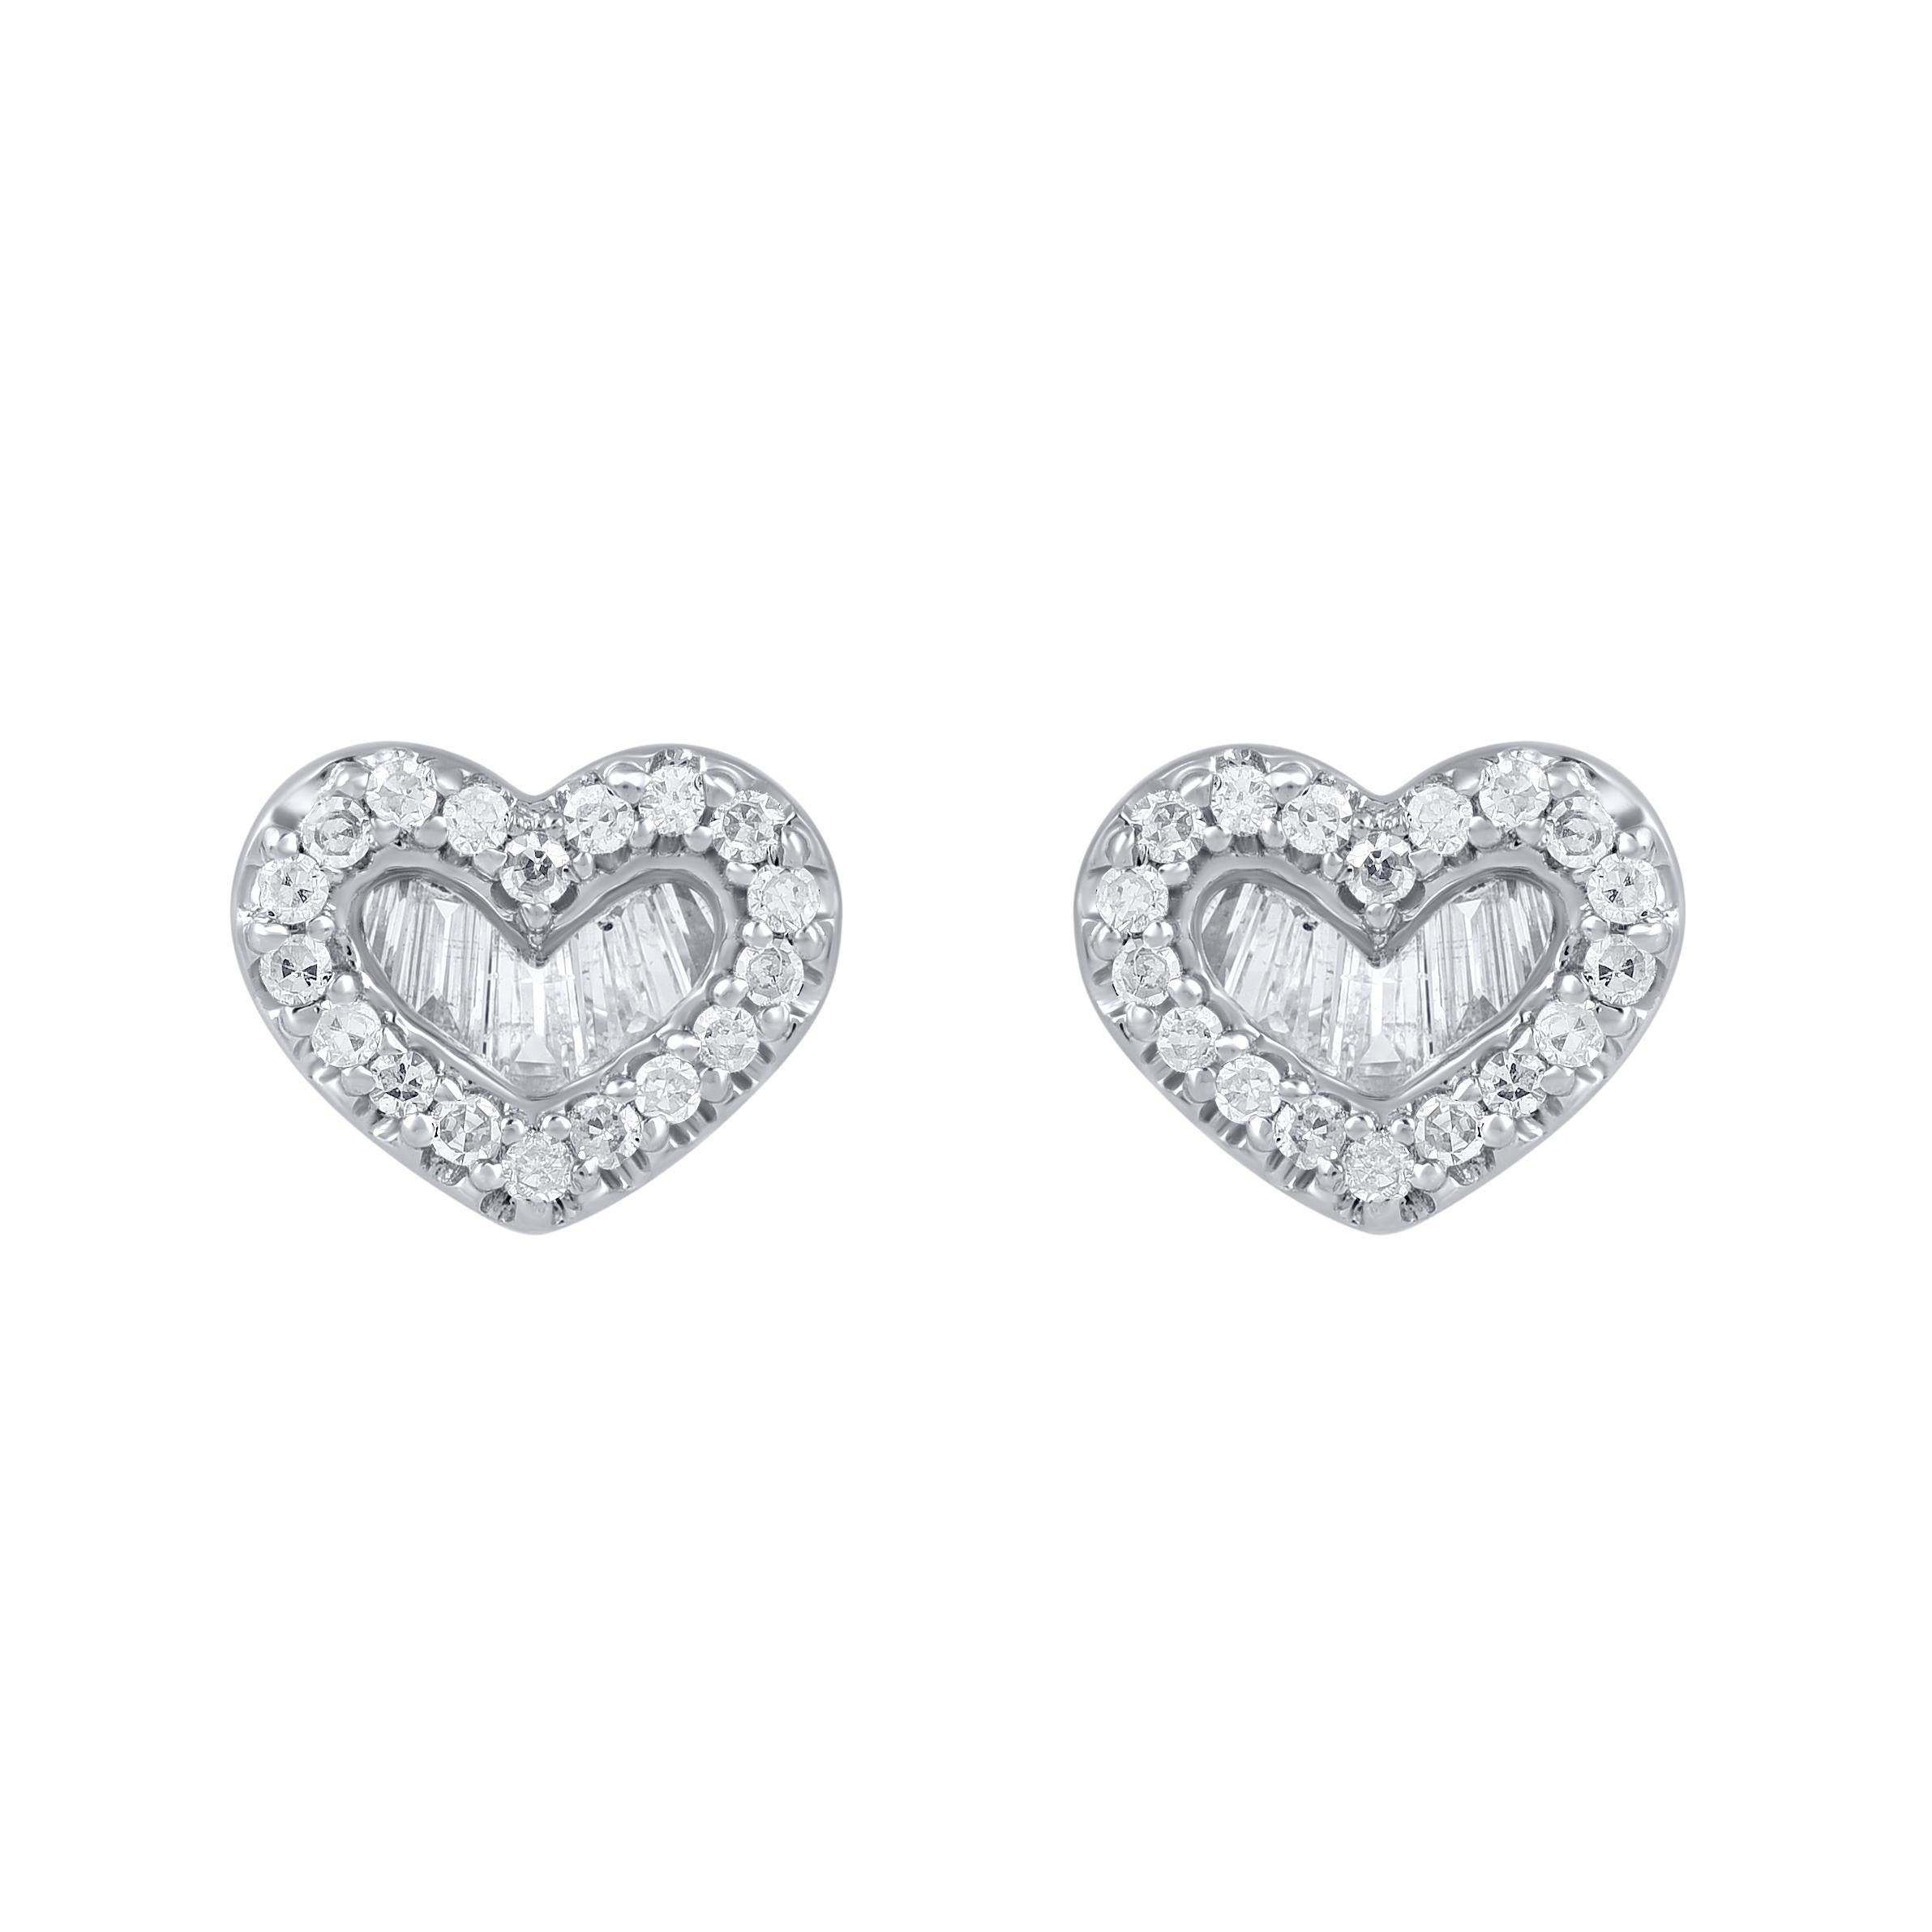 Romantic TJD 0.33 Carat Round and Baguette Diamond 14KT White Gold Heart Stud Earrings For Sale